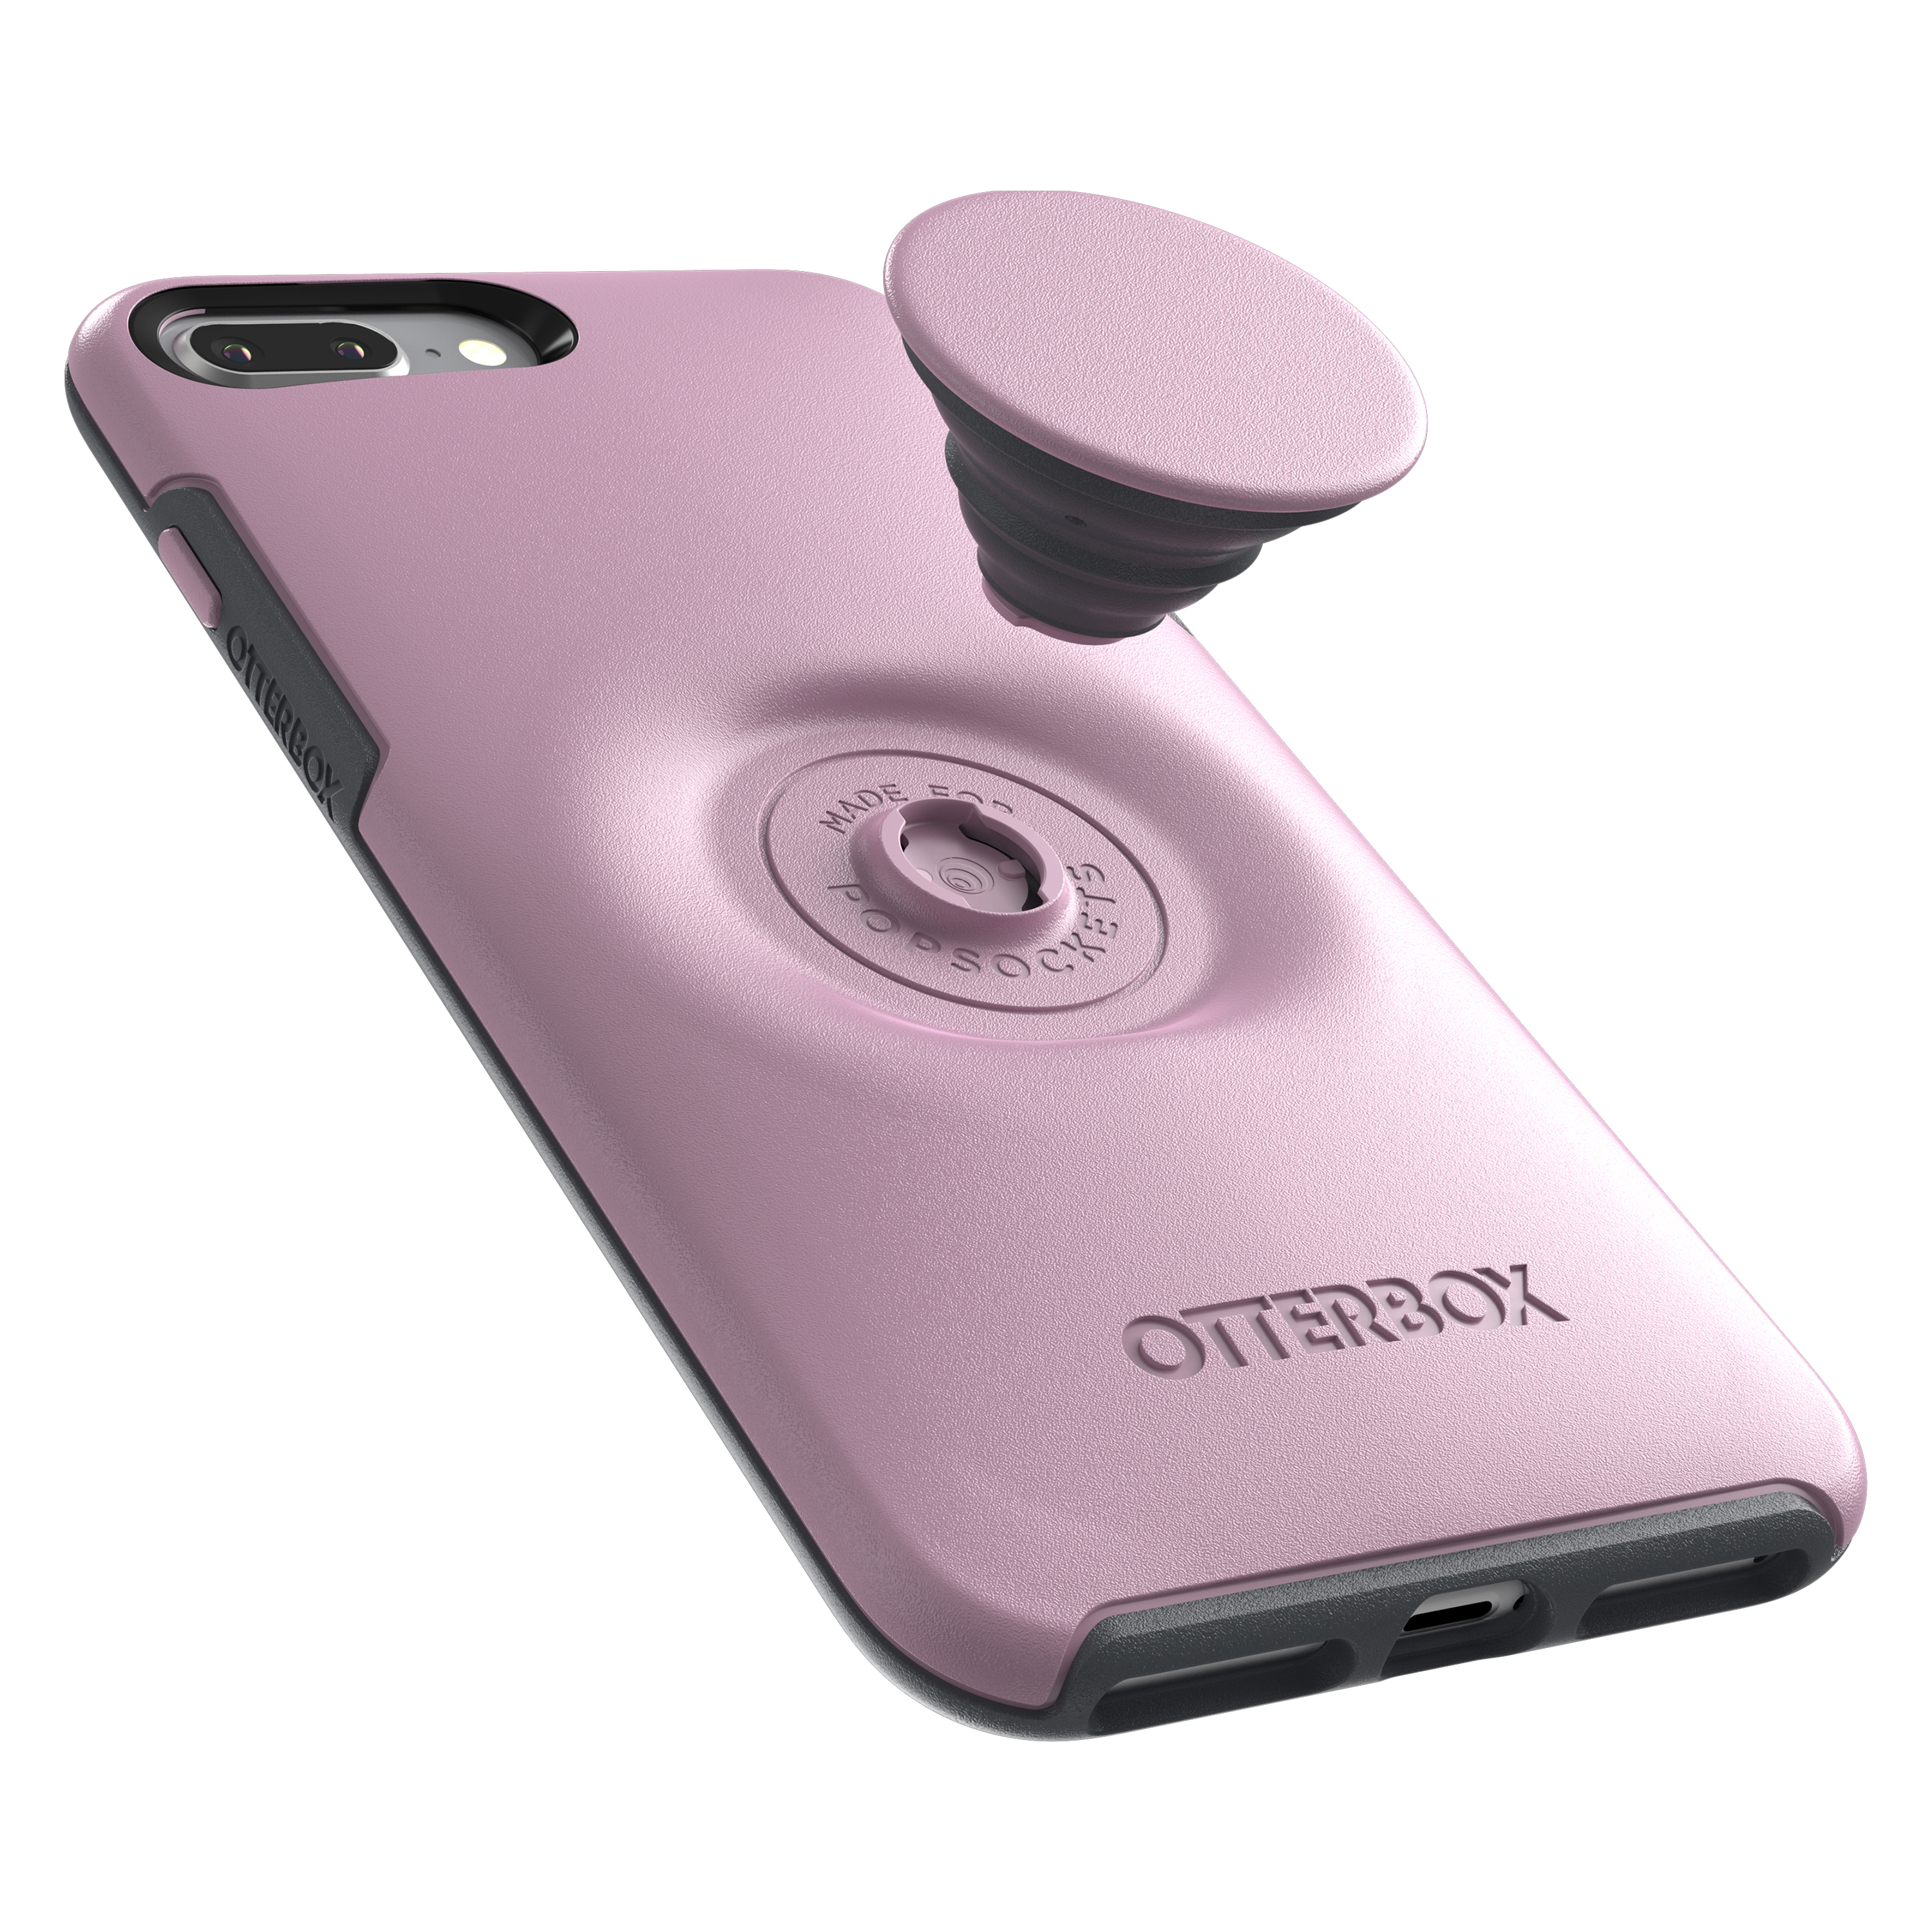 7 iPhone OTTERBOX 8 Symmetry, Pink Plus, Pop Otter iPhone Backcover, Plus, Apple, +